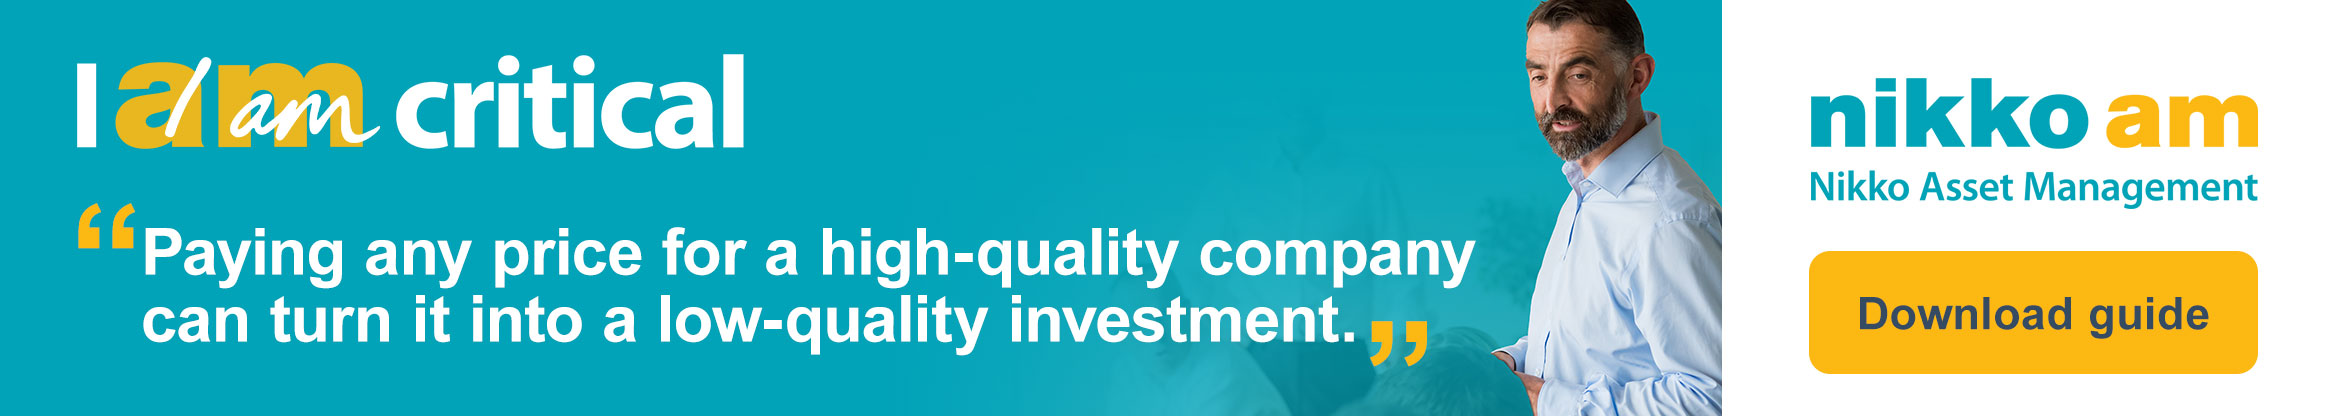 Paying any price for a high-quality company can turn it into a low-quality investment